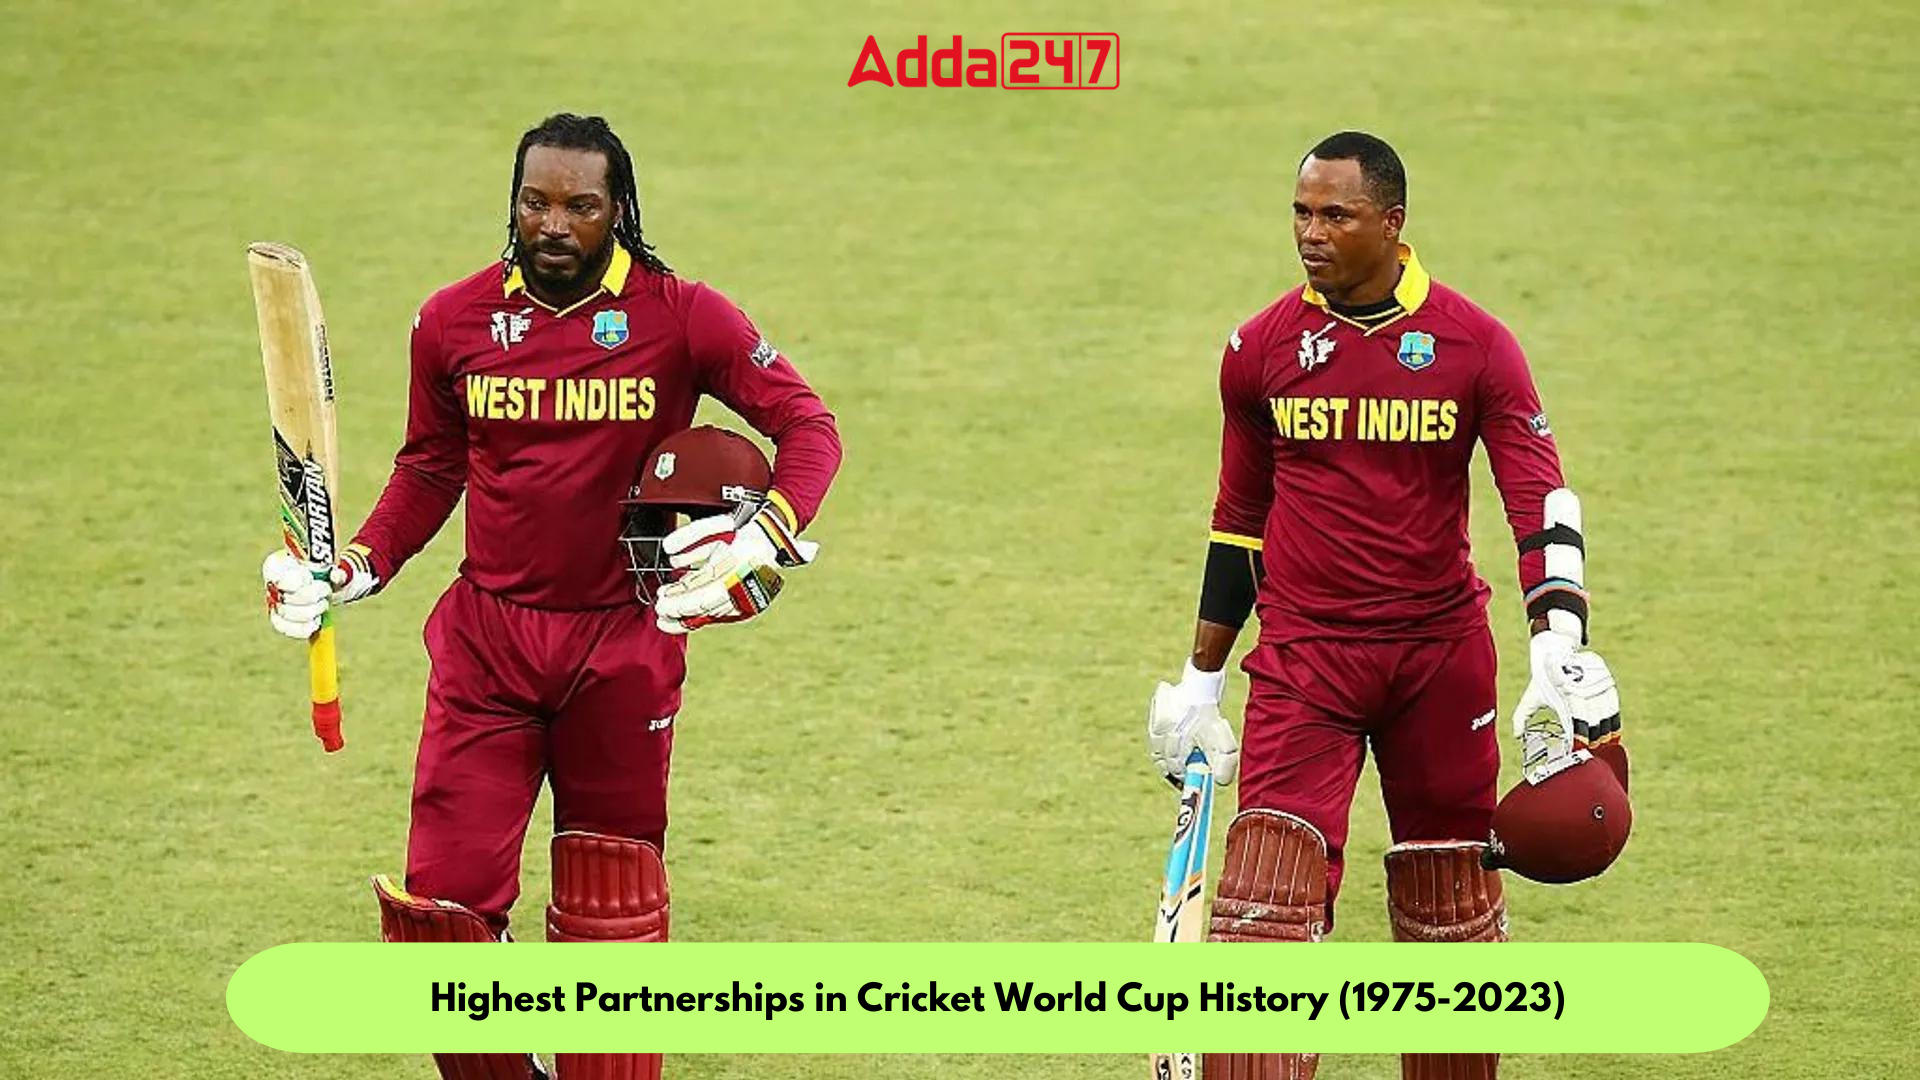 Highest Partnerships in Cricket World Cup History (1975-2023)